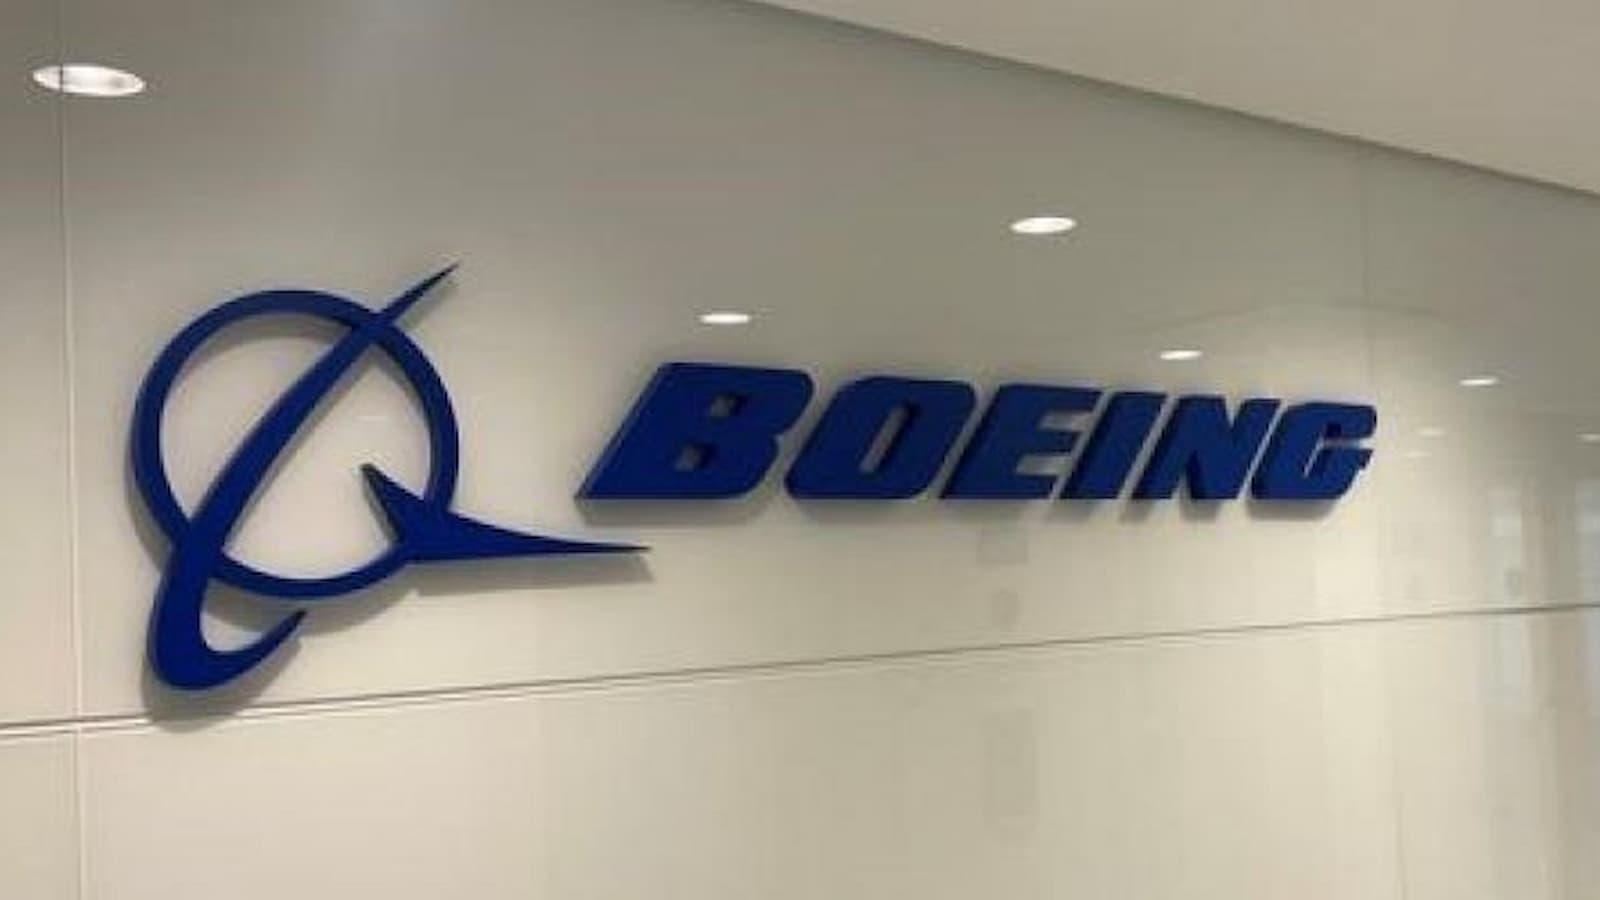 Boeing advises airlines to inspect 787 flight deck seat switches